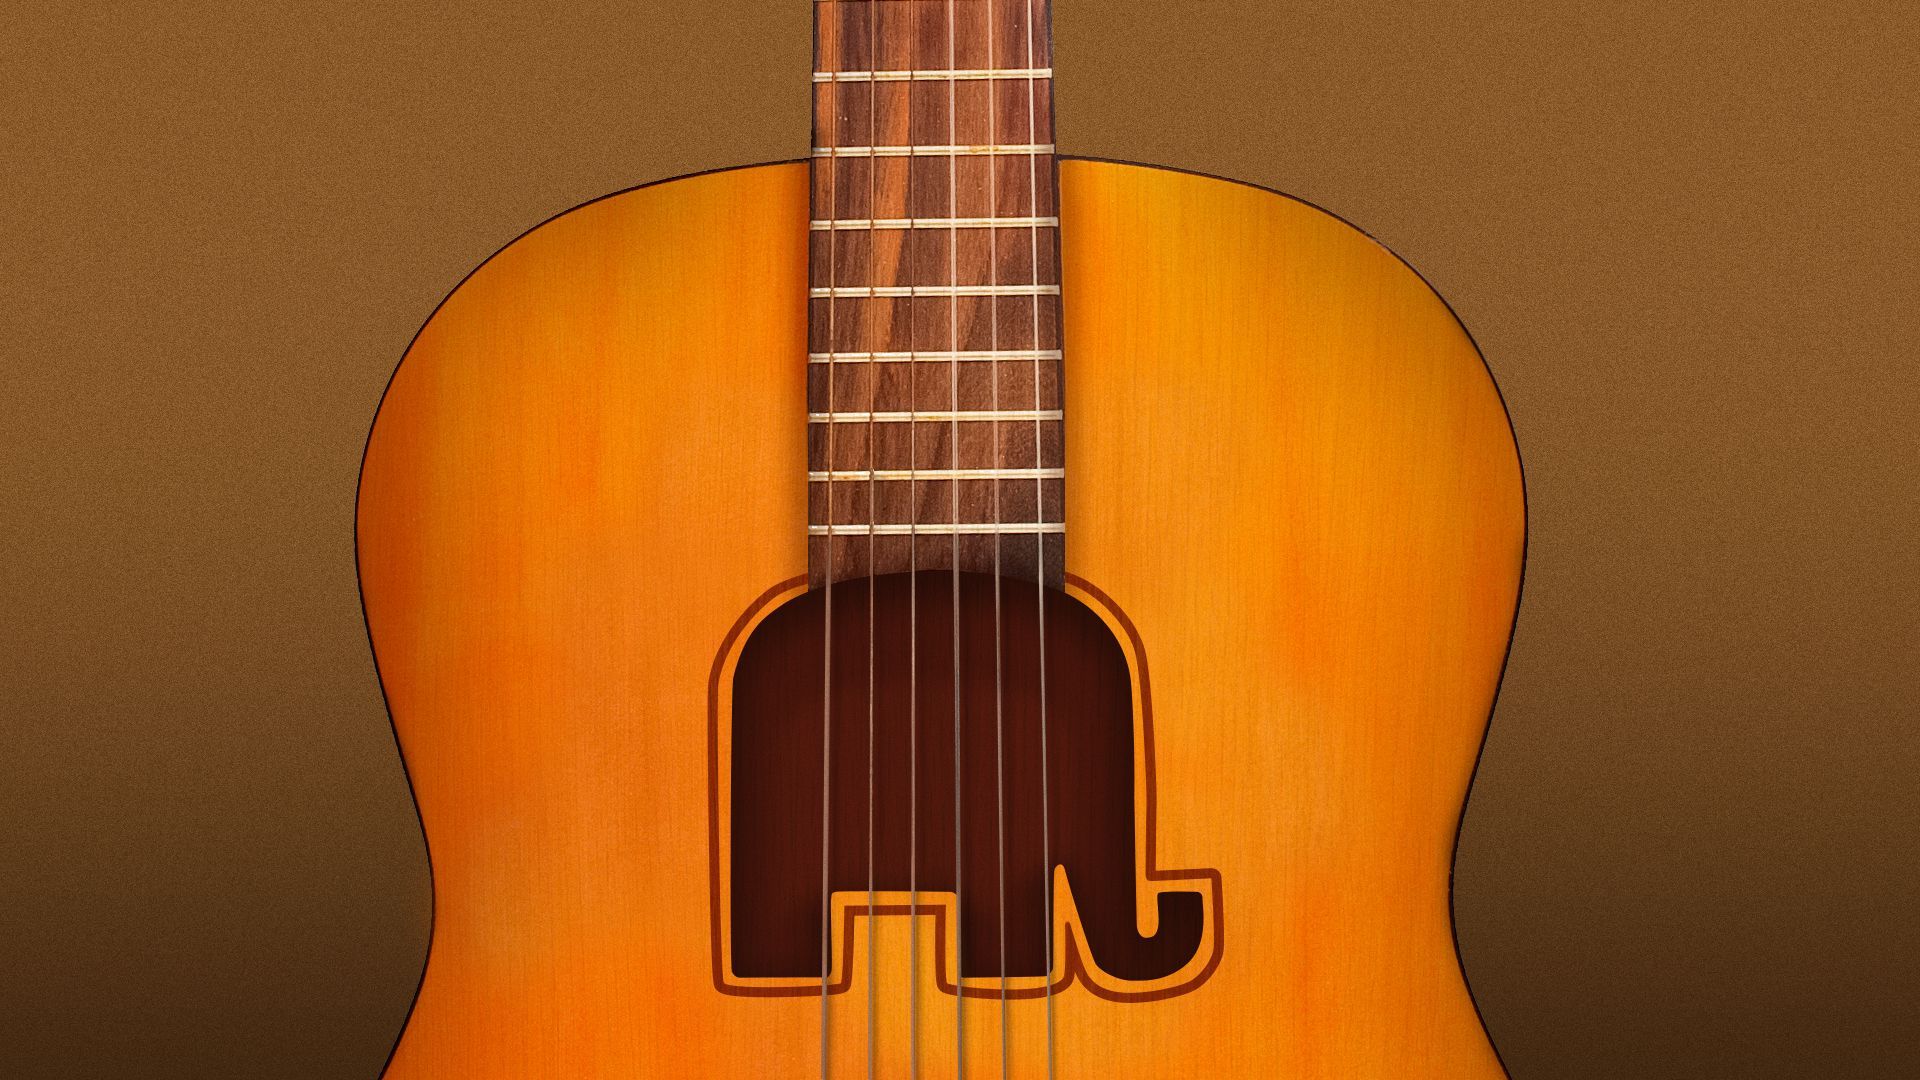 Illustration of an acoustic guitar with the sound hole in the shape of an elephant.